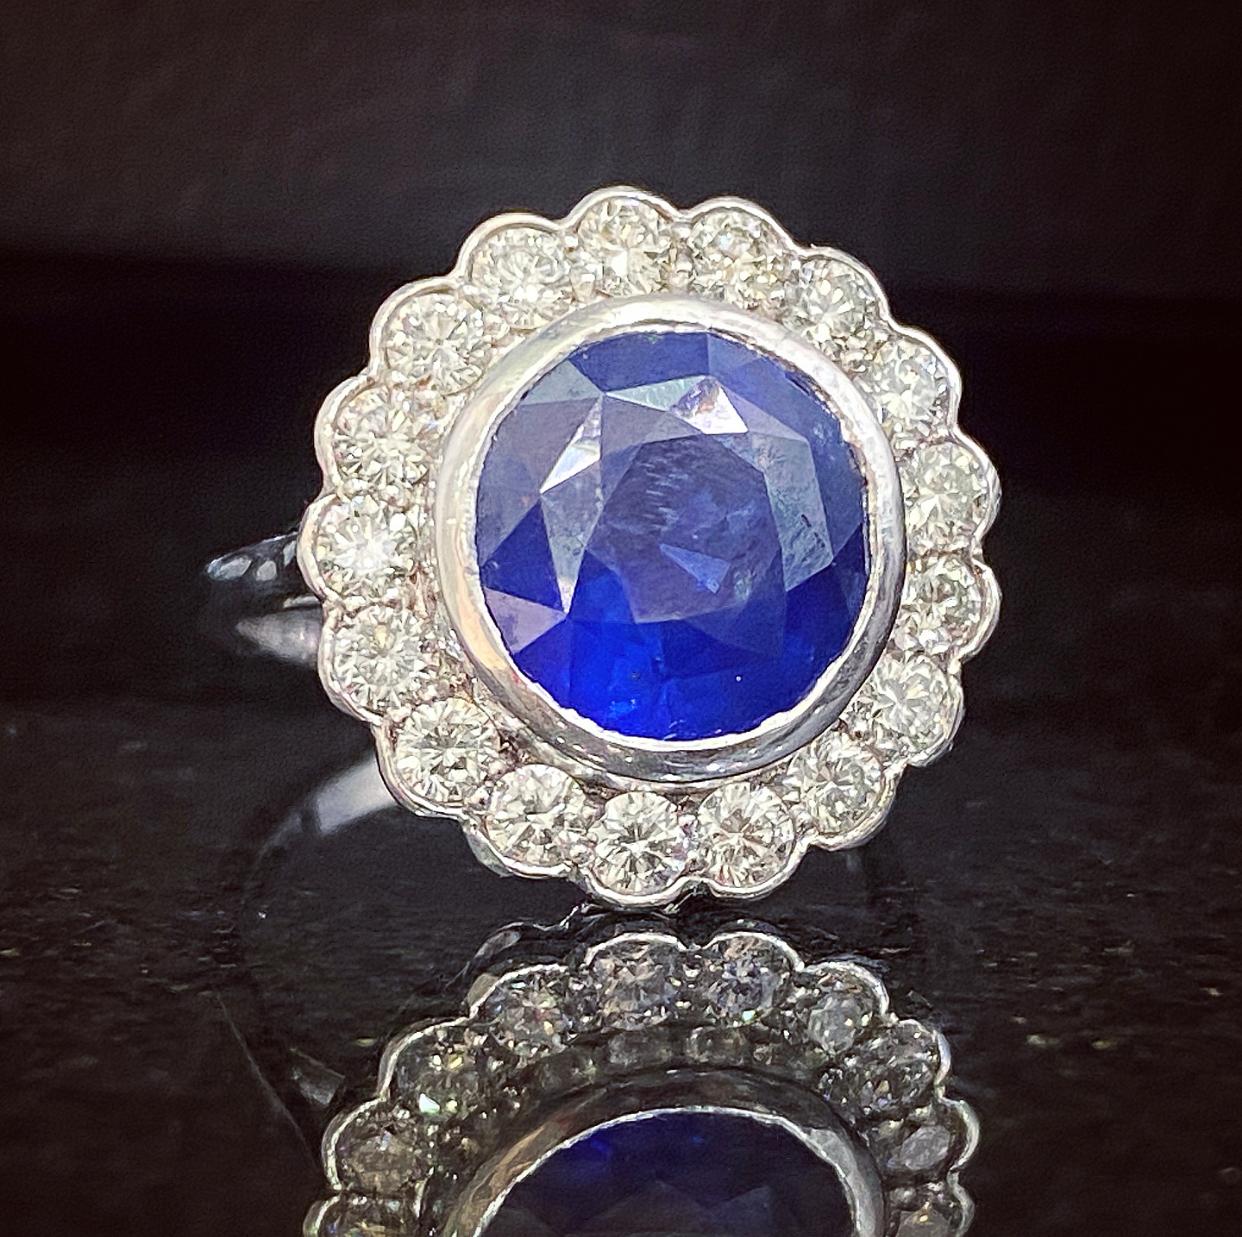 Vintage 5.00 Carat Sapphire and Diamond Halo Ring, circa 1970s For Sale 2